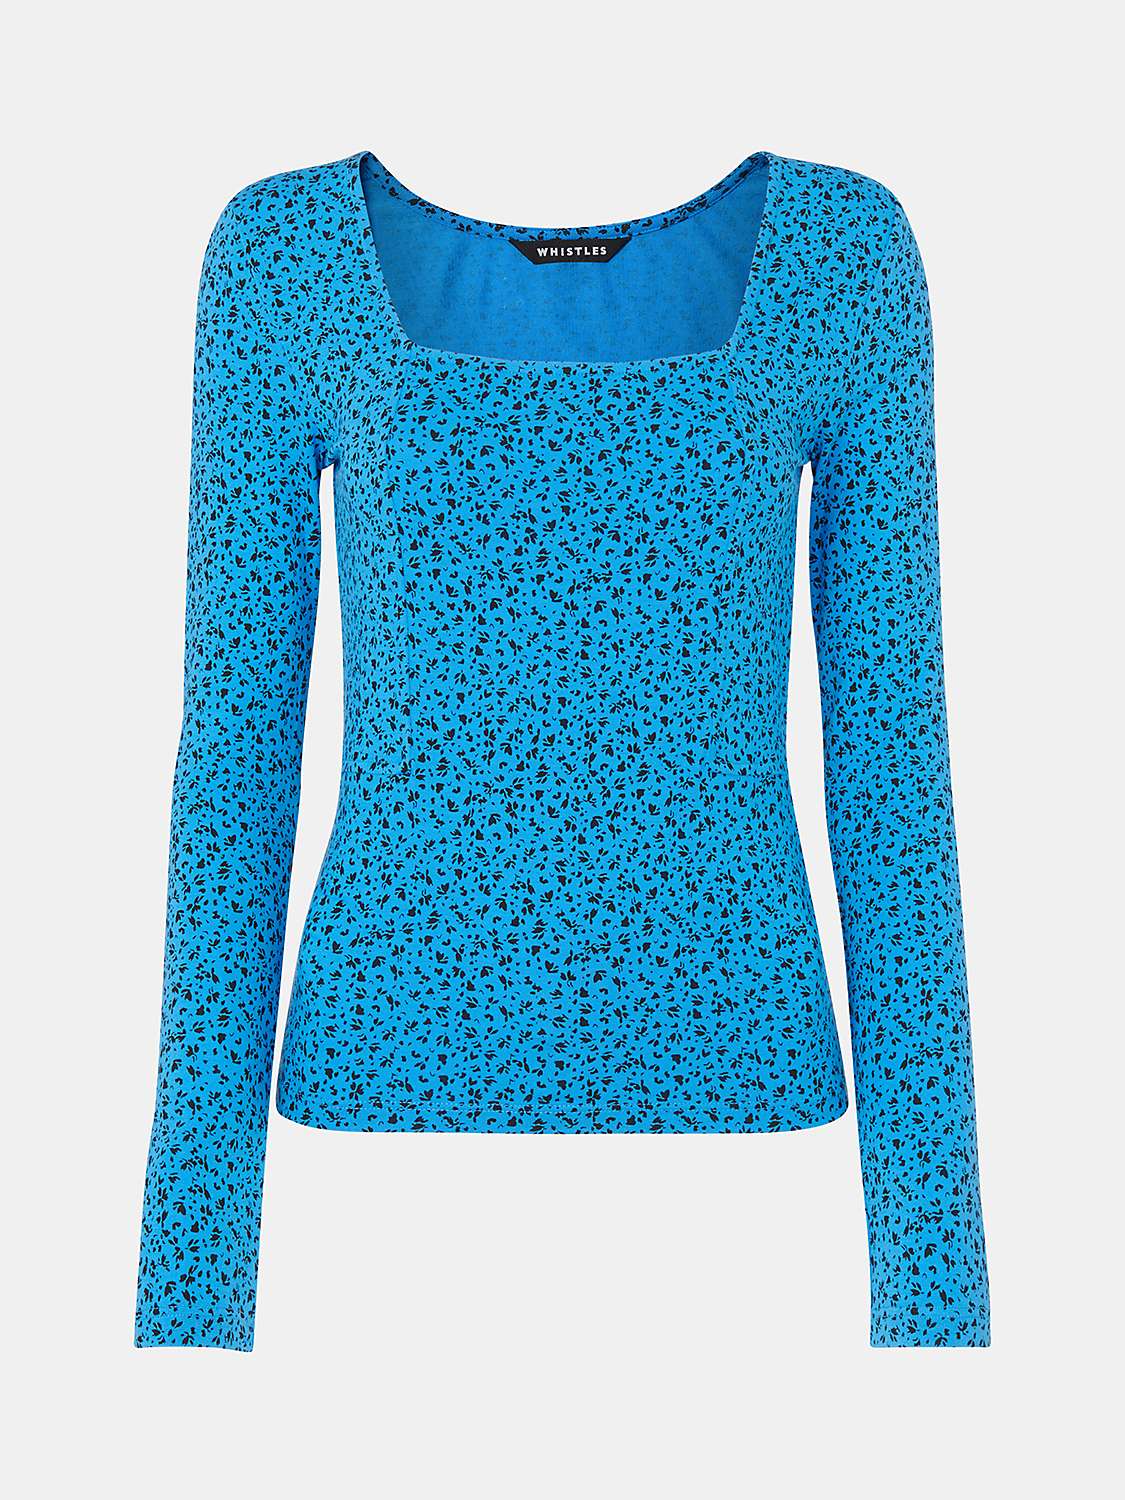 Buy Whistles Micro Bouquet Sqaure Neck Top, Blue/Multi Online at johnlewis.com